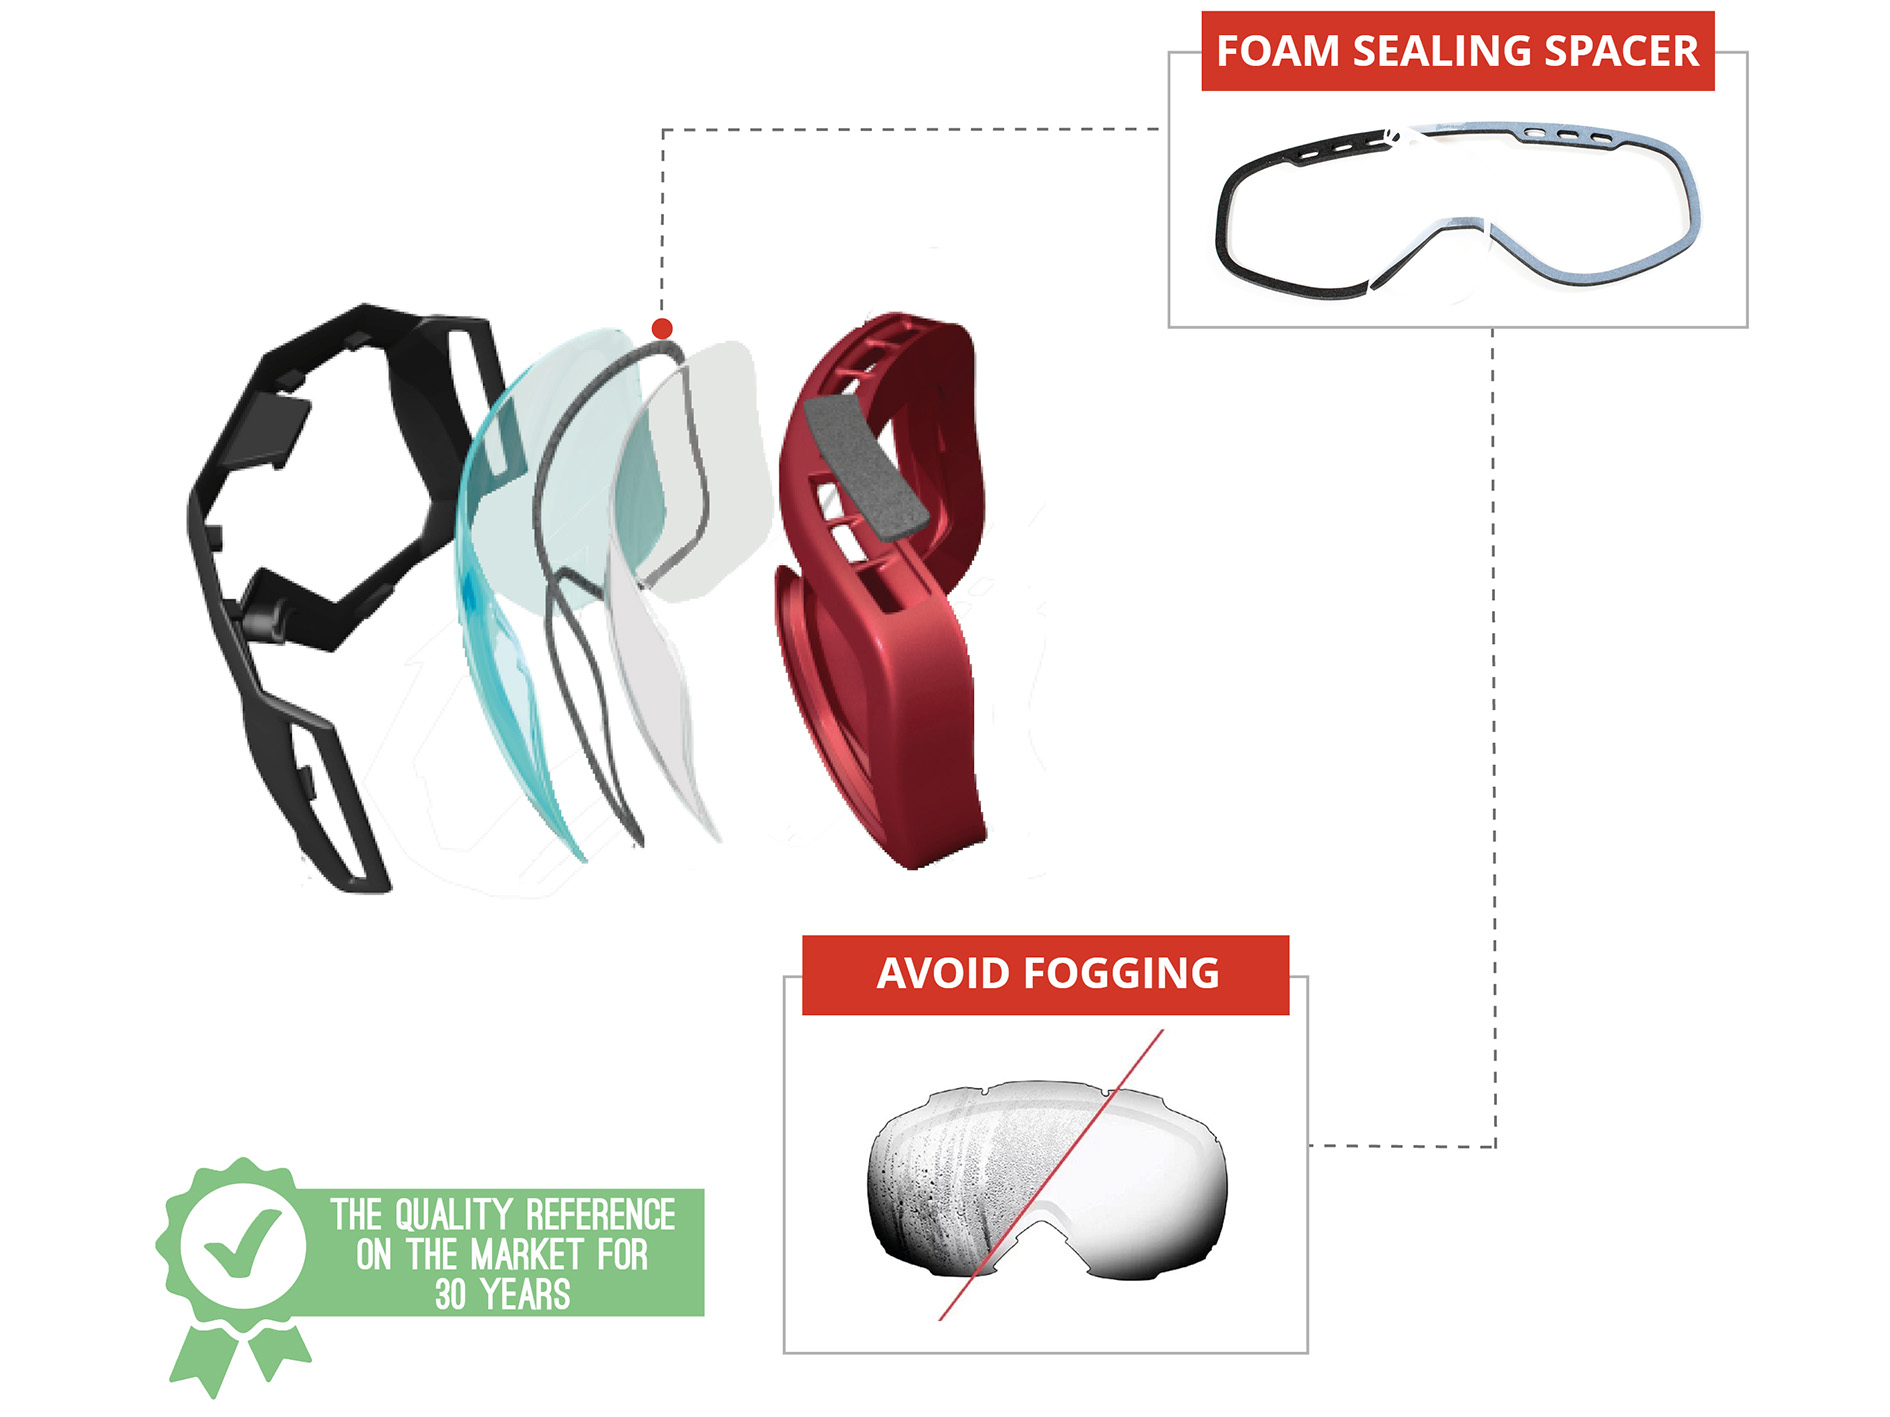 SAY GOOD BYE TO CONDENSATION IN YOUR SKI GOGGLES